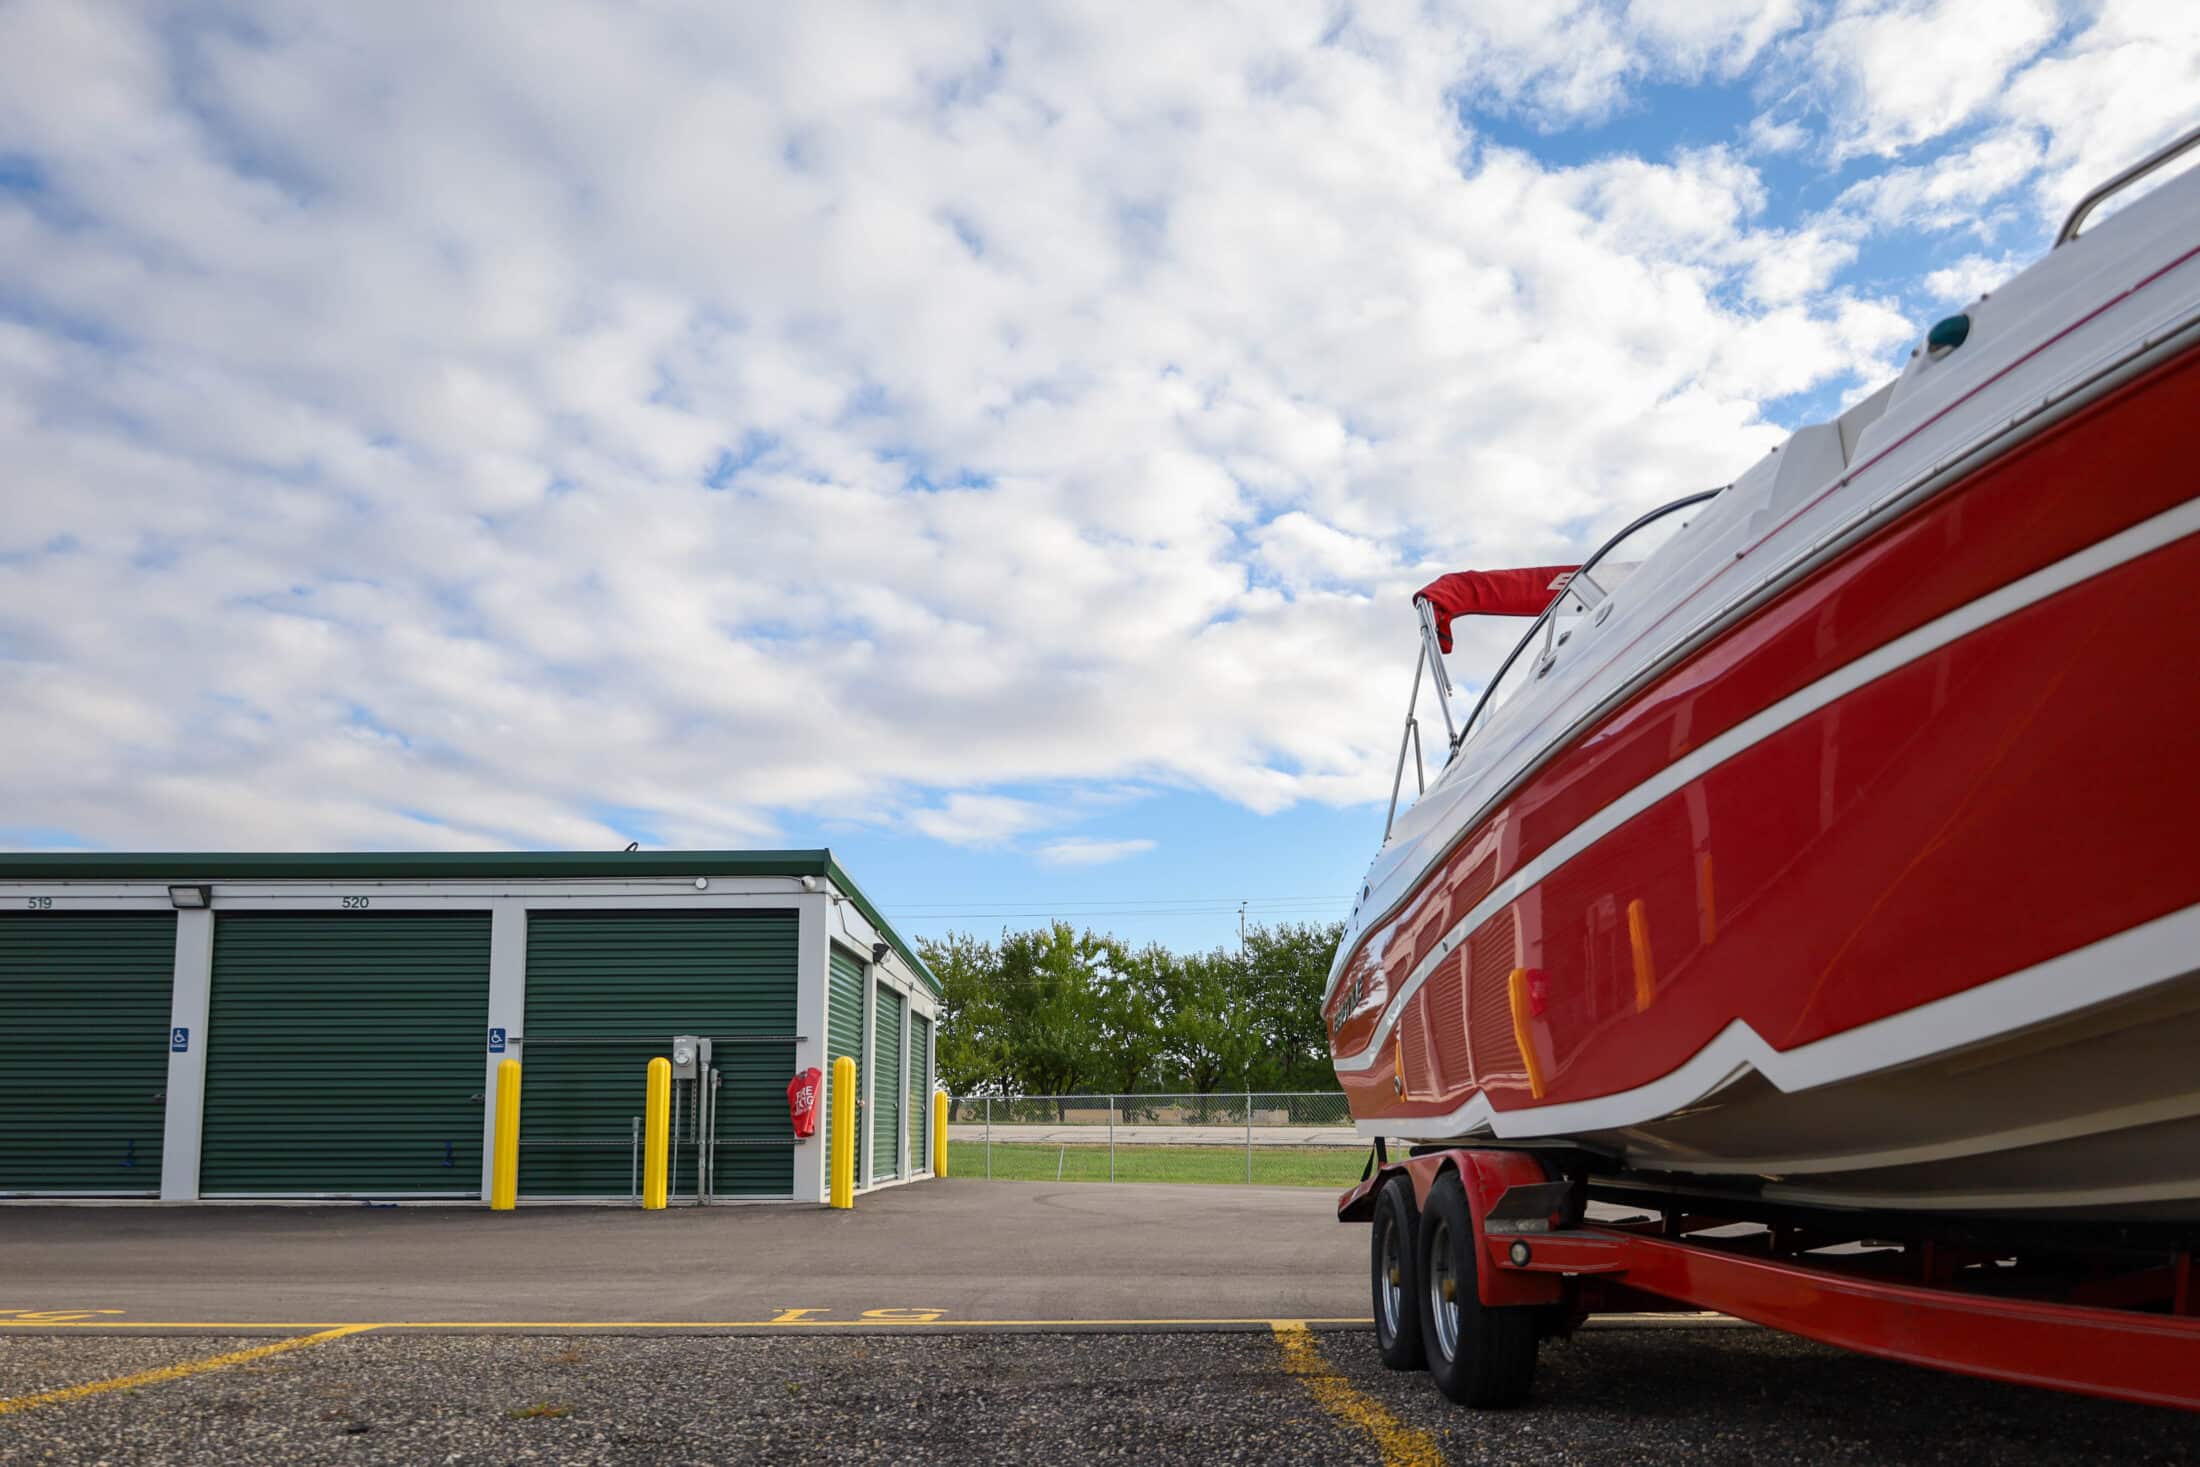 Drive-up storage units in Belvidere. Parking lot in the facility to store boats, campers, RVs, semi trucks & other large vehicles as well. Boxed Up Self-storage is your go to storage facility in Belvidere. Low angle photo of red sports boat.